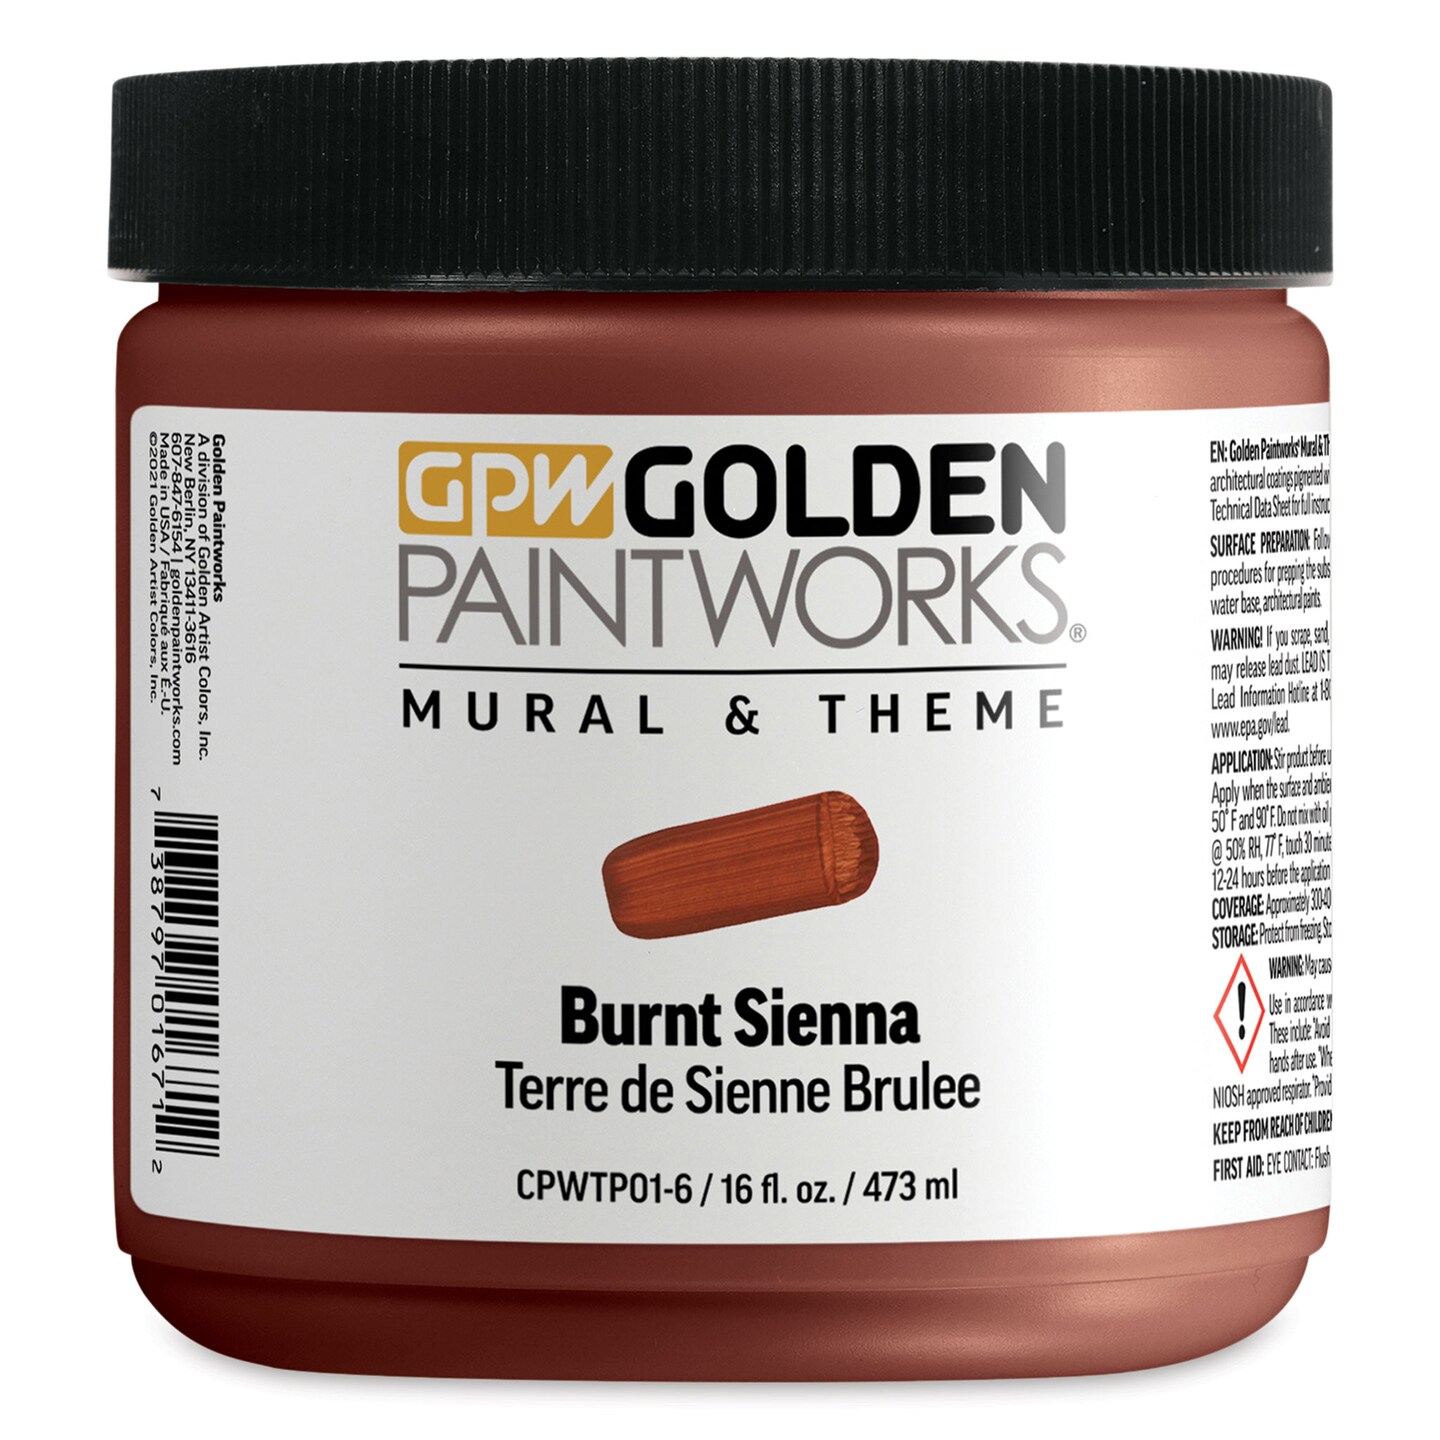 Golden Paintworks Mural and Theme Acrylic Paint - Burnt Sienna, 16 oz, Jar